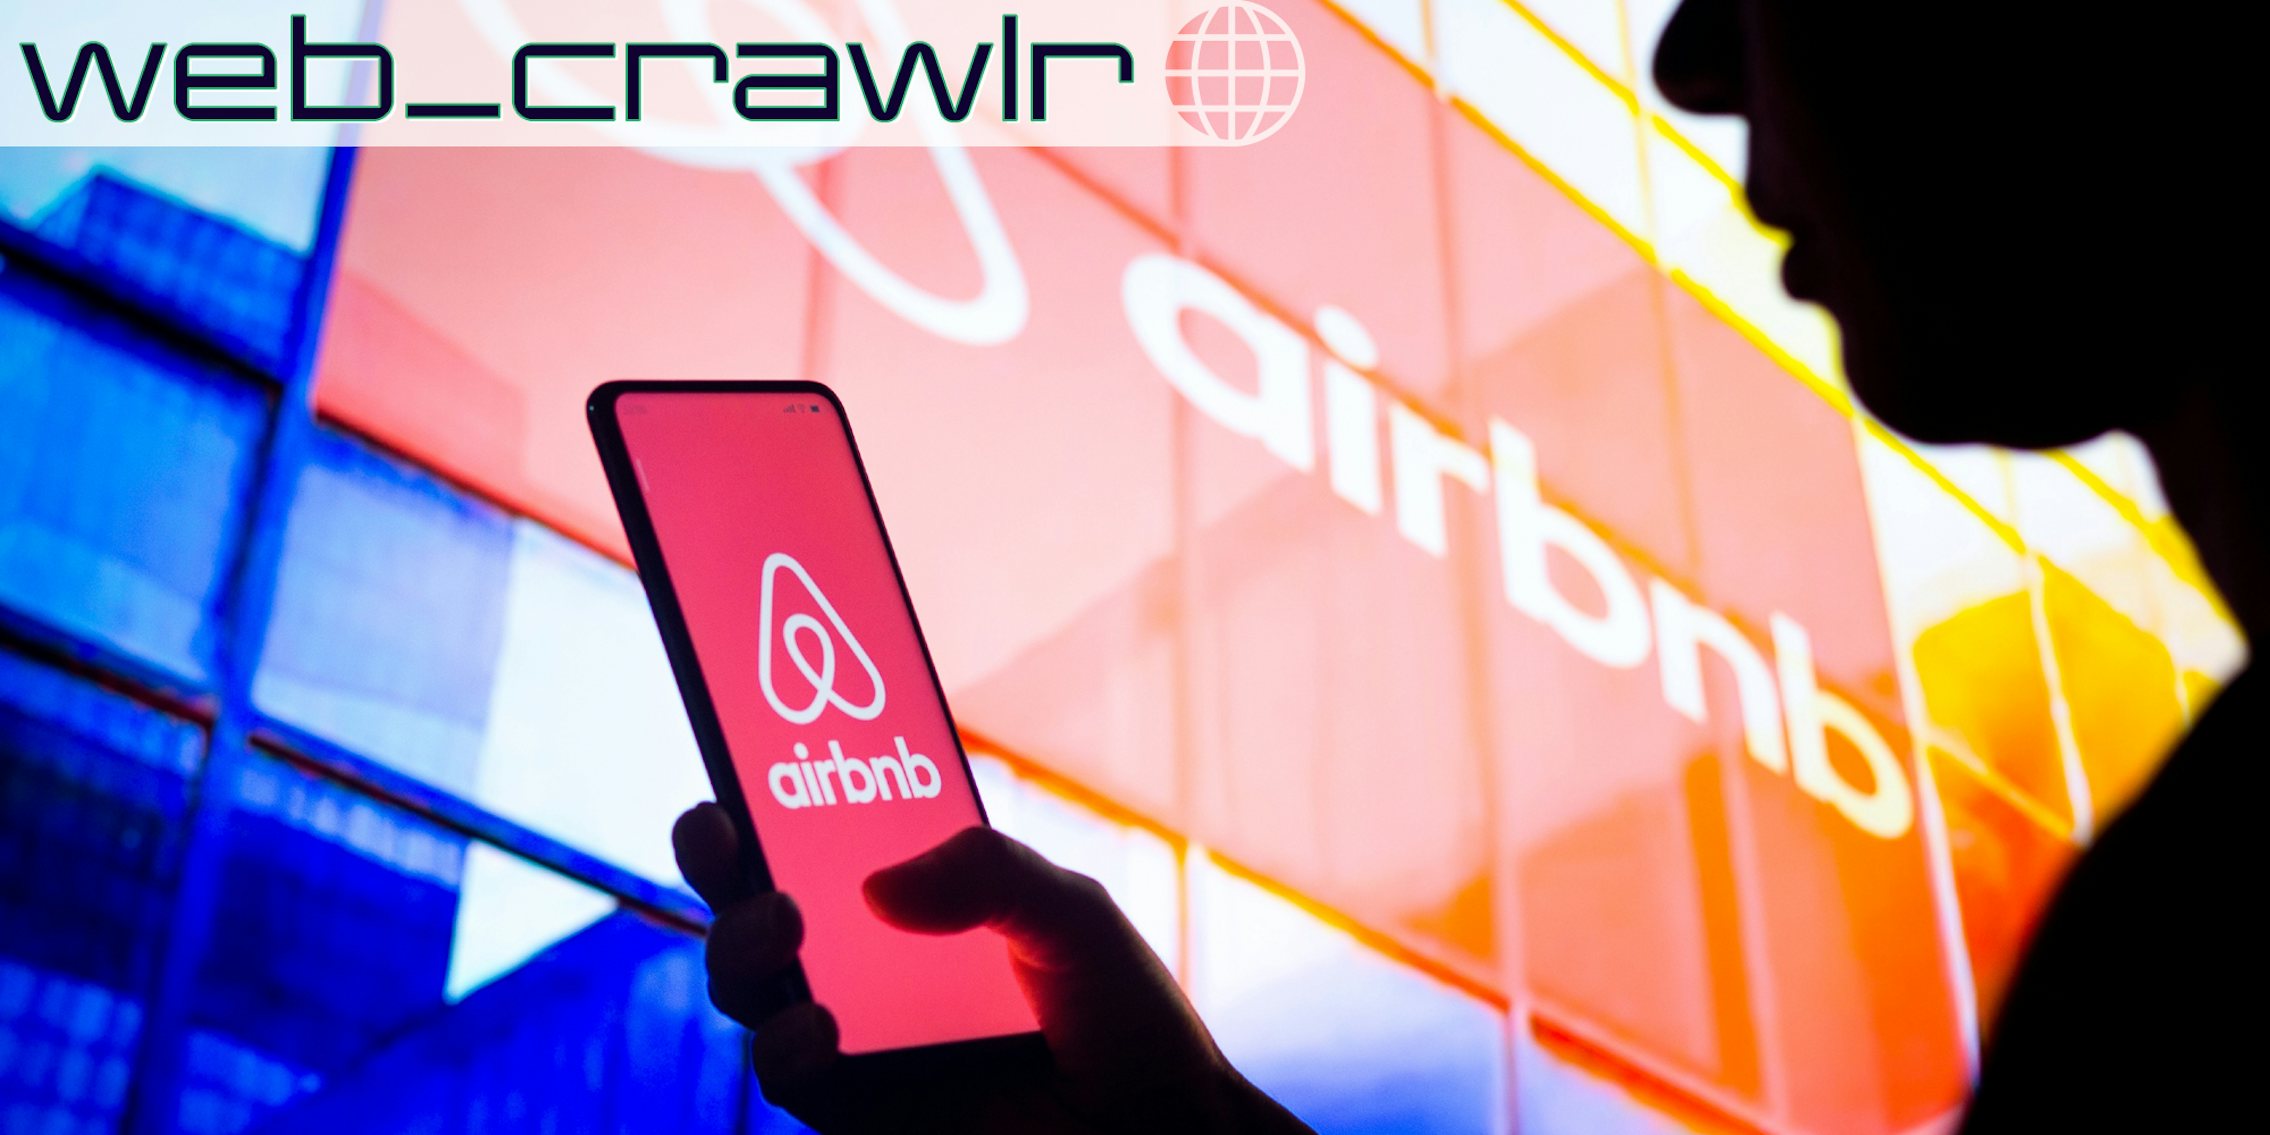 A person holding a phone with the Airbnb logo on it. The Daily Dot newsletter web_crawlr logo is in the top left corner.